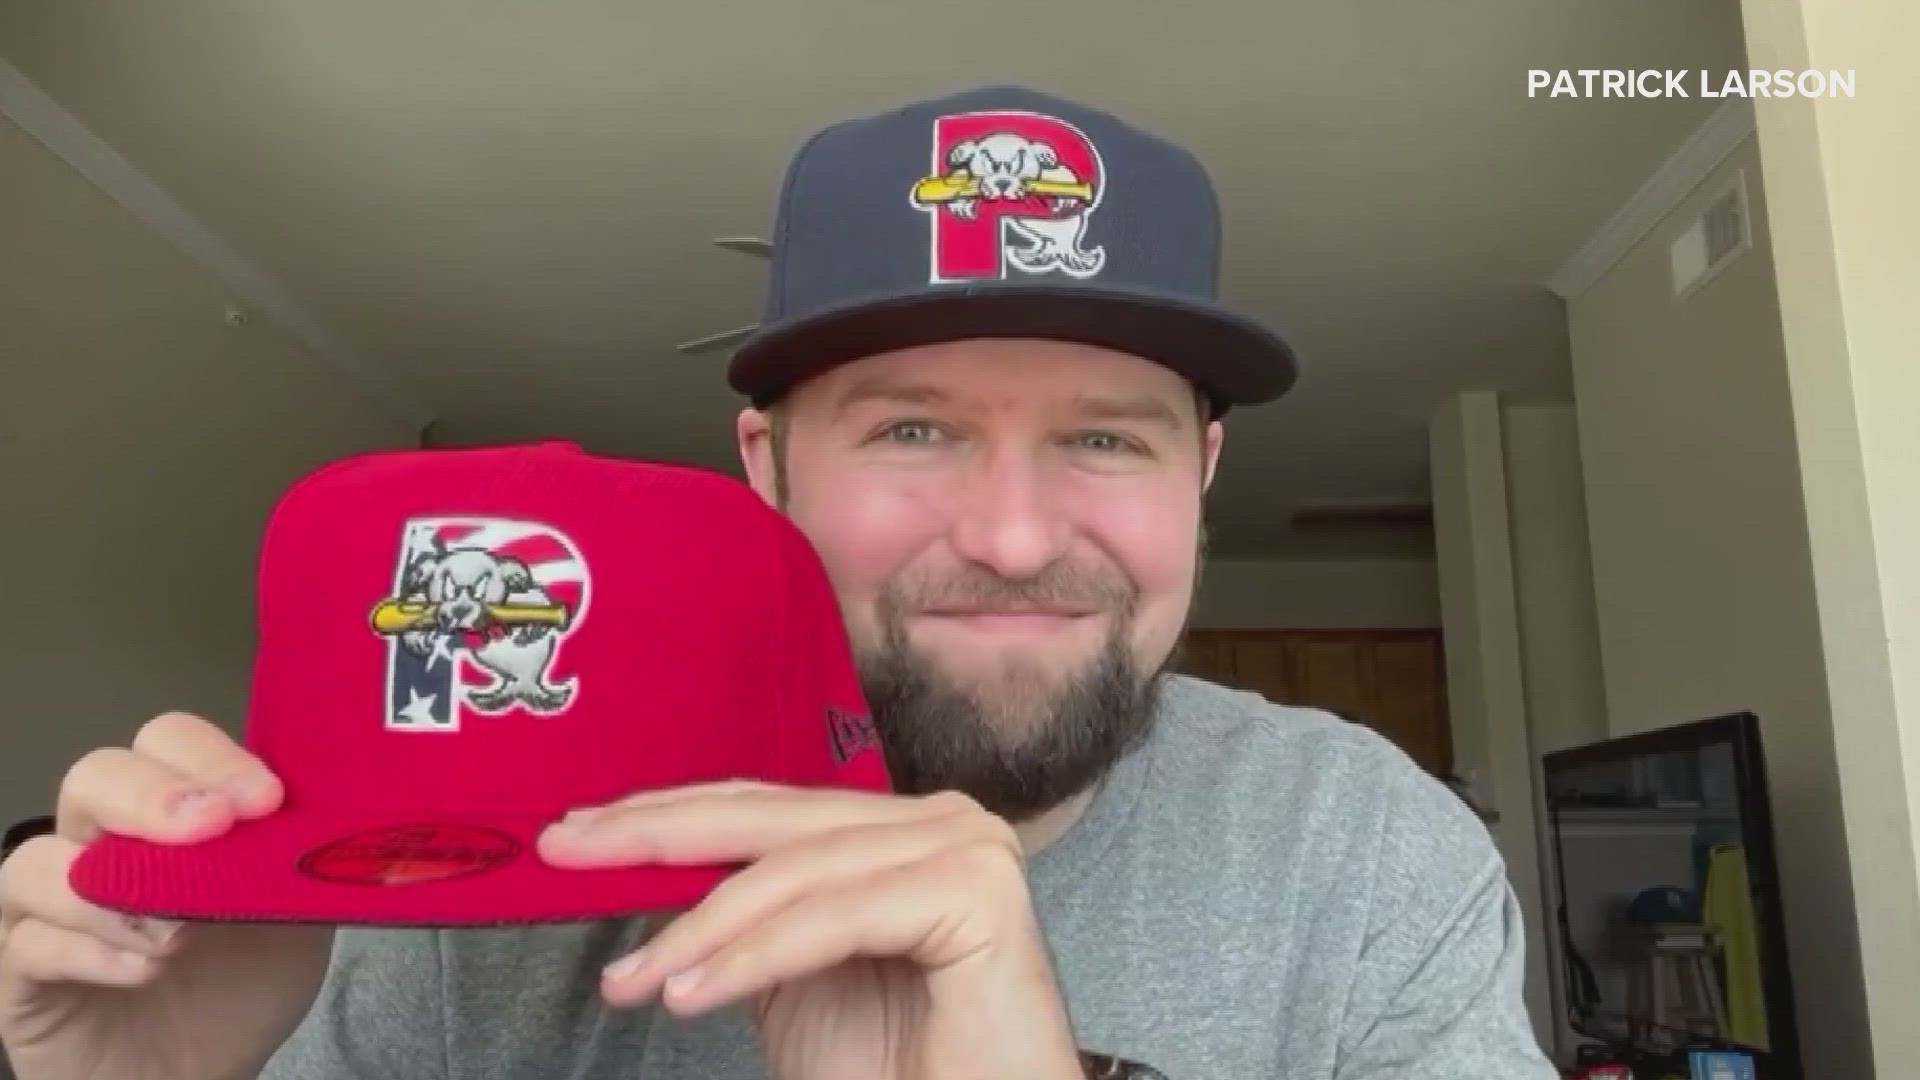 The Portland Sea Dogs have a rich history, and one man is exploring it through the team's many hats. Patrick Larson/Curved Brim Media

MiLB Hat History Series